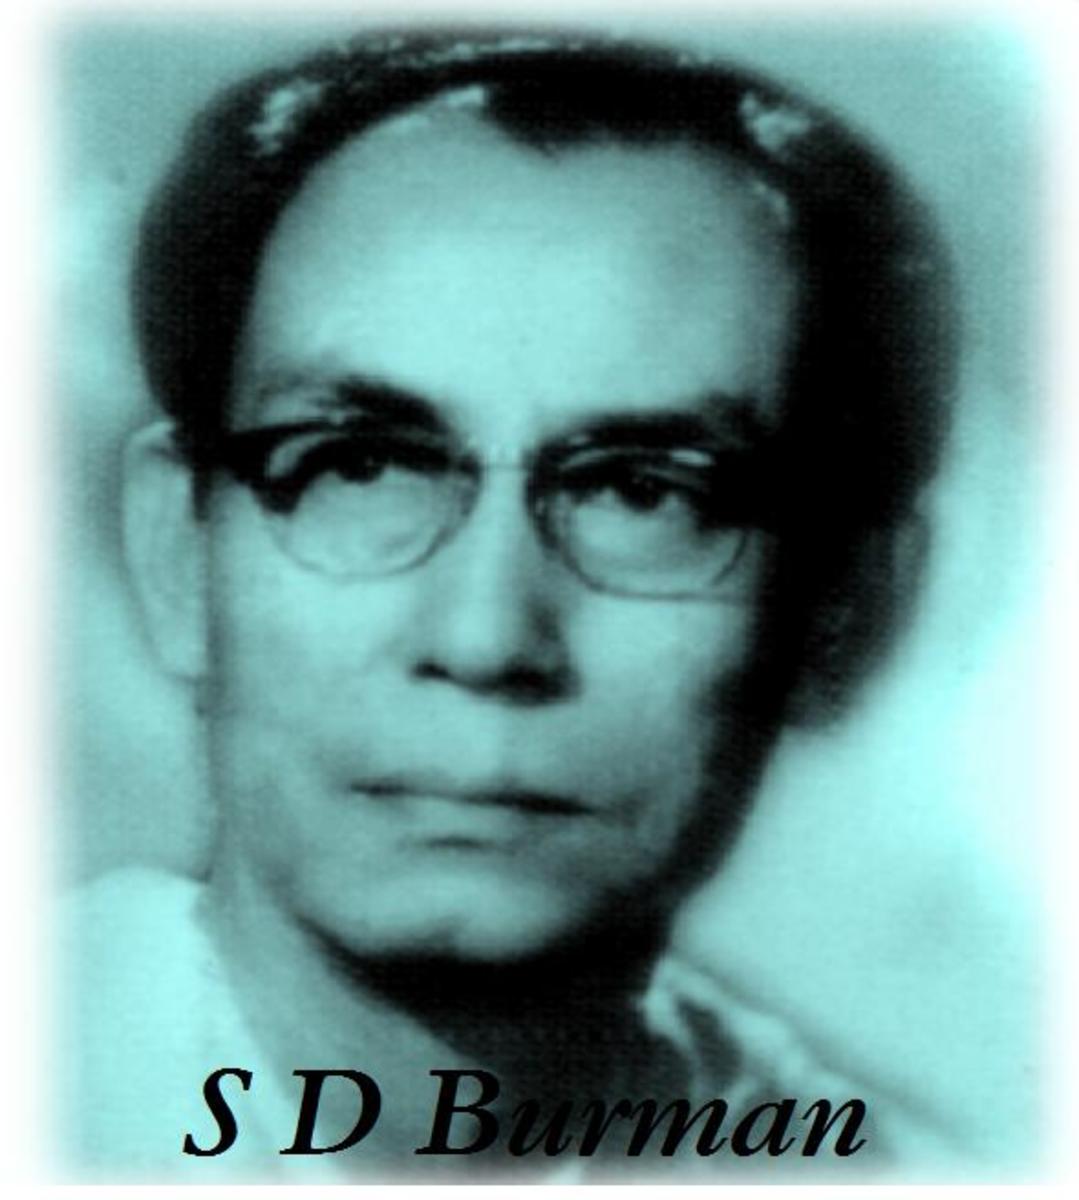 Sachin Dev Burman - The man who left his royal heritage to help a new musical dawn in Bollywood